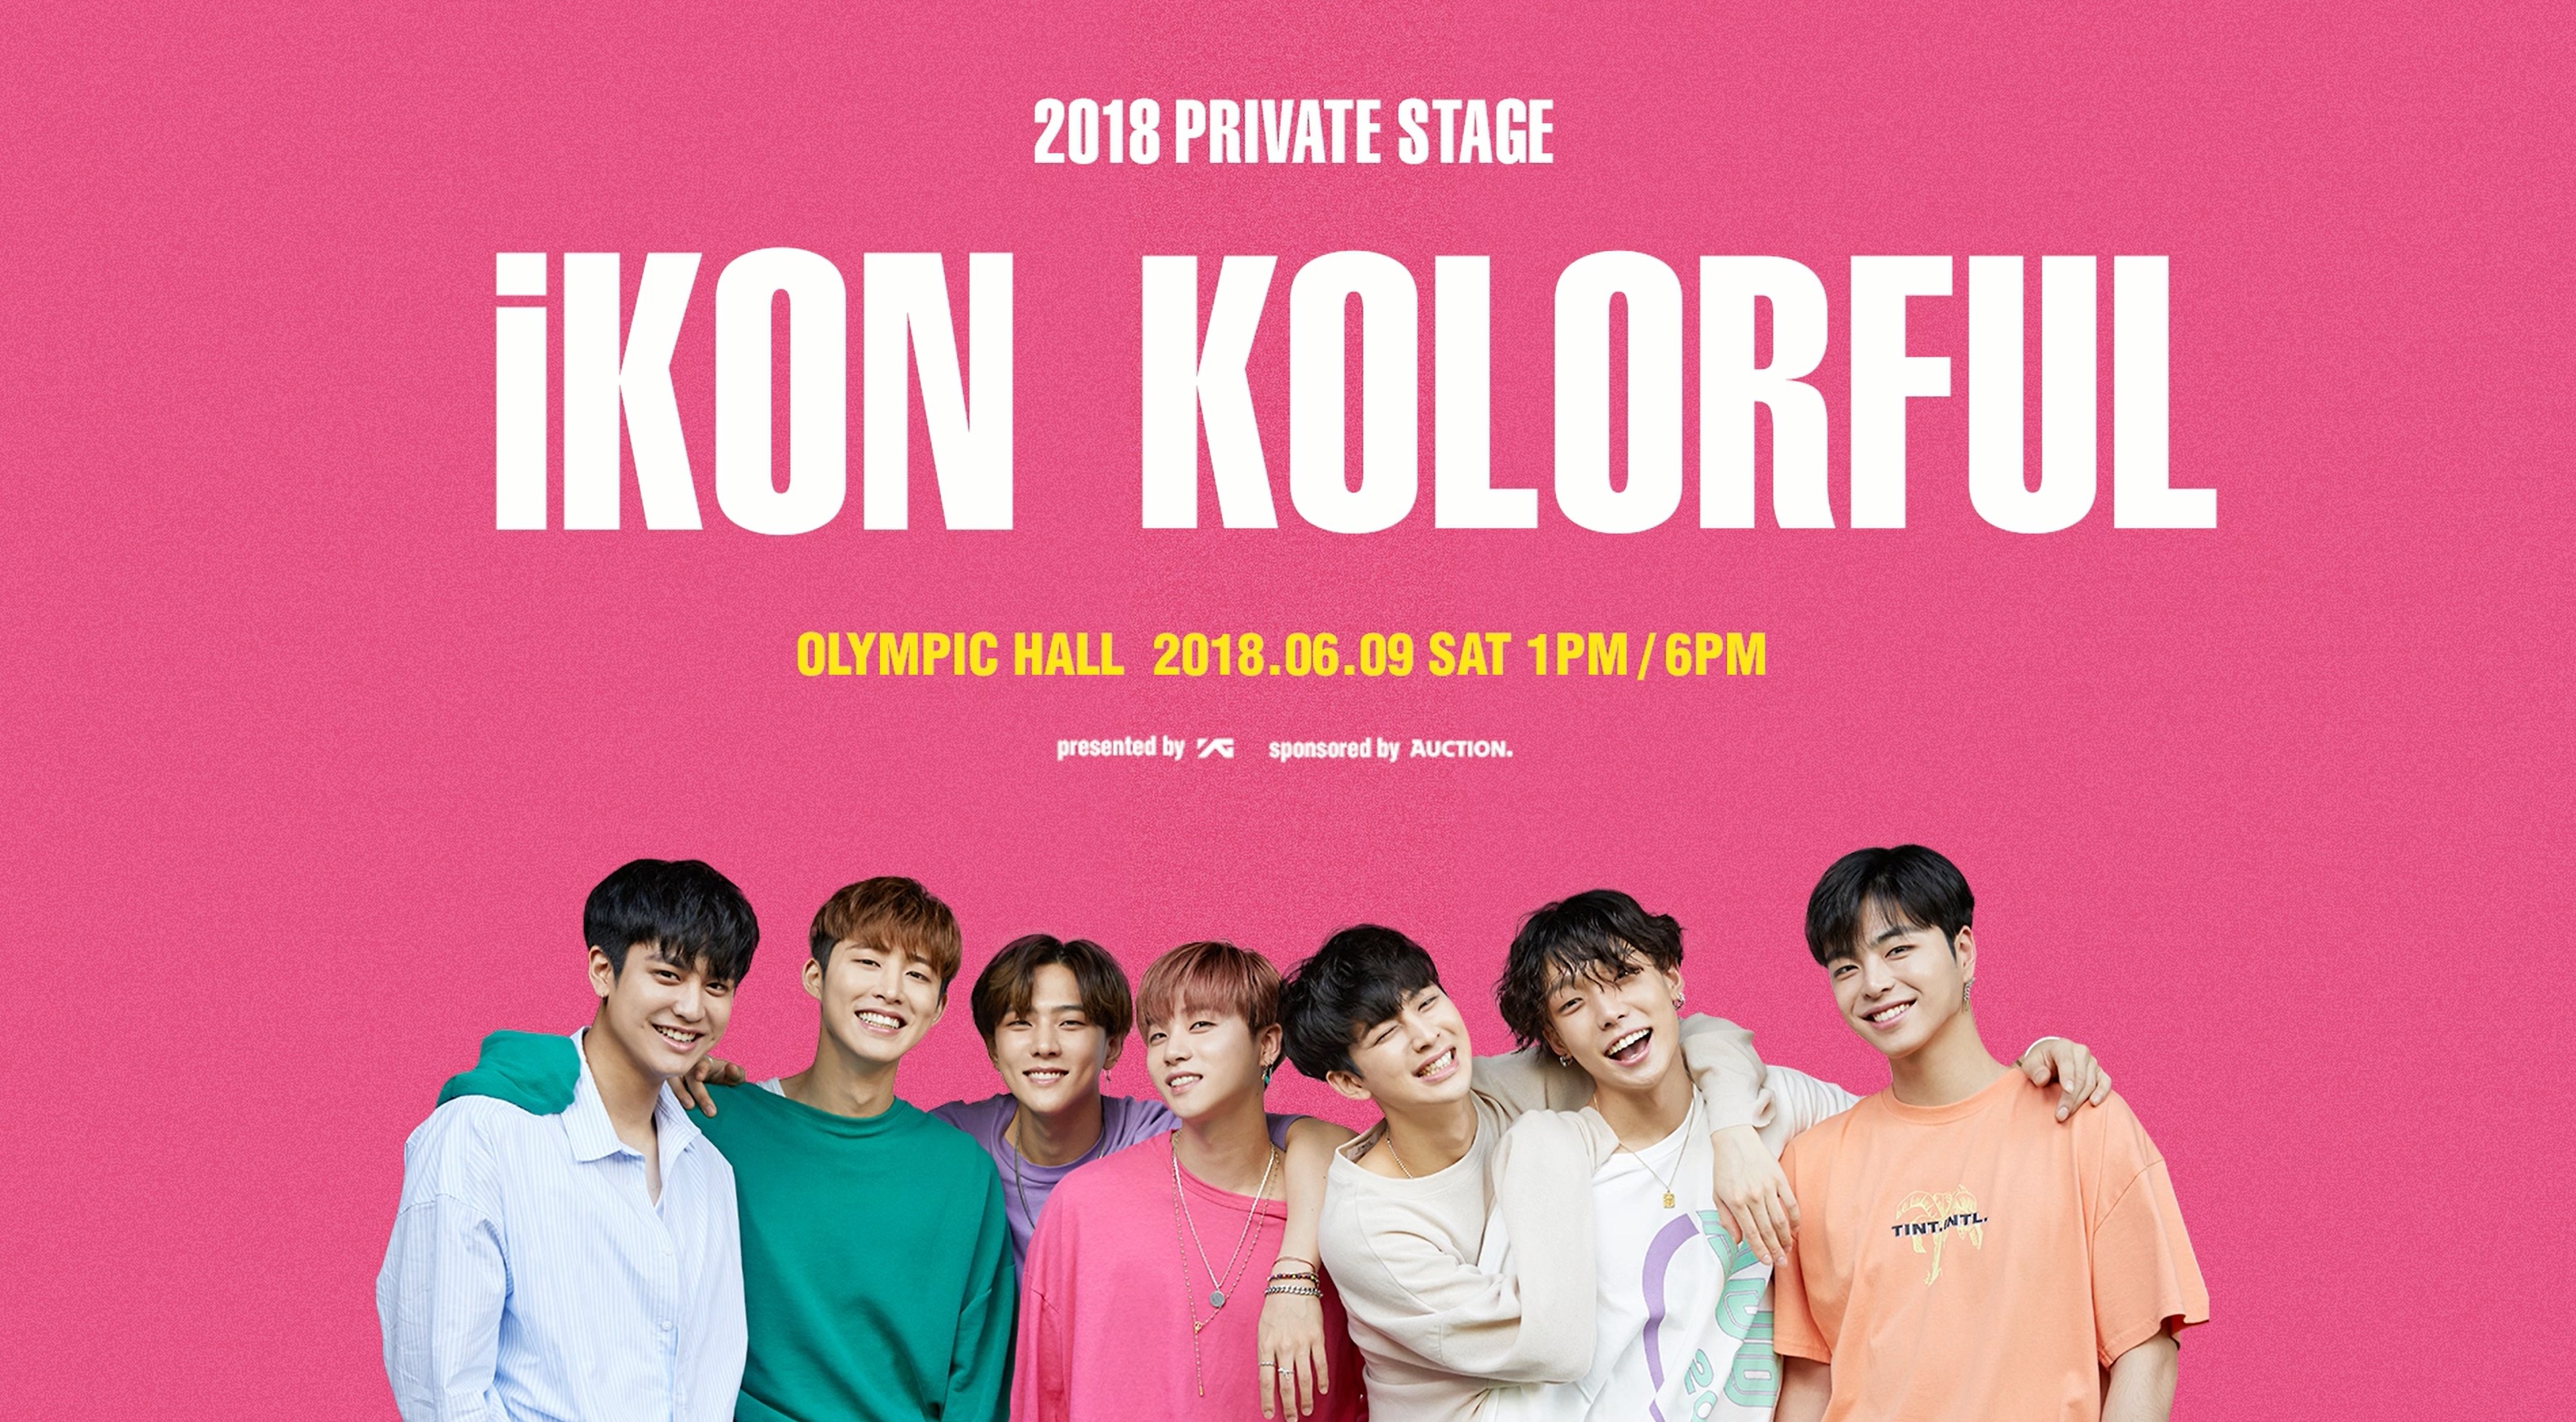 iKON  - 2018 PRIVATE STAGE [KOLORFUL] MESSAGE FROM iKON